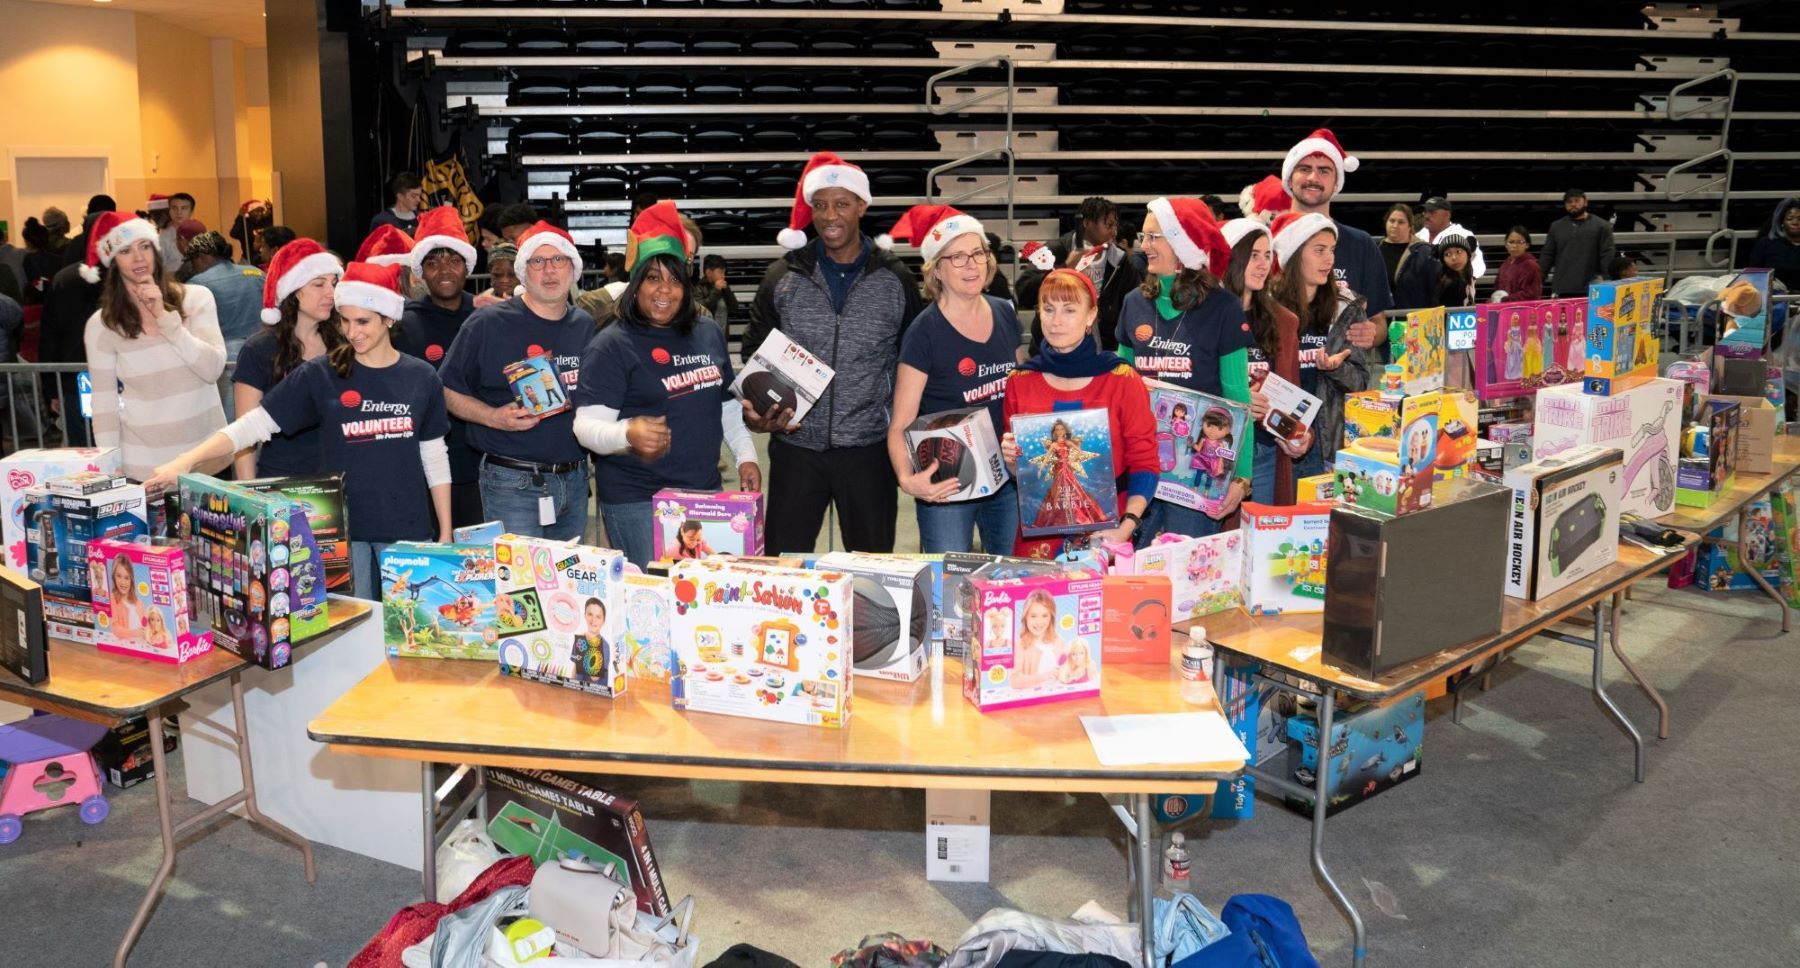 Entergy volunteers helped Santa gift toys to more than 4,000 kids.